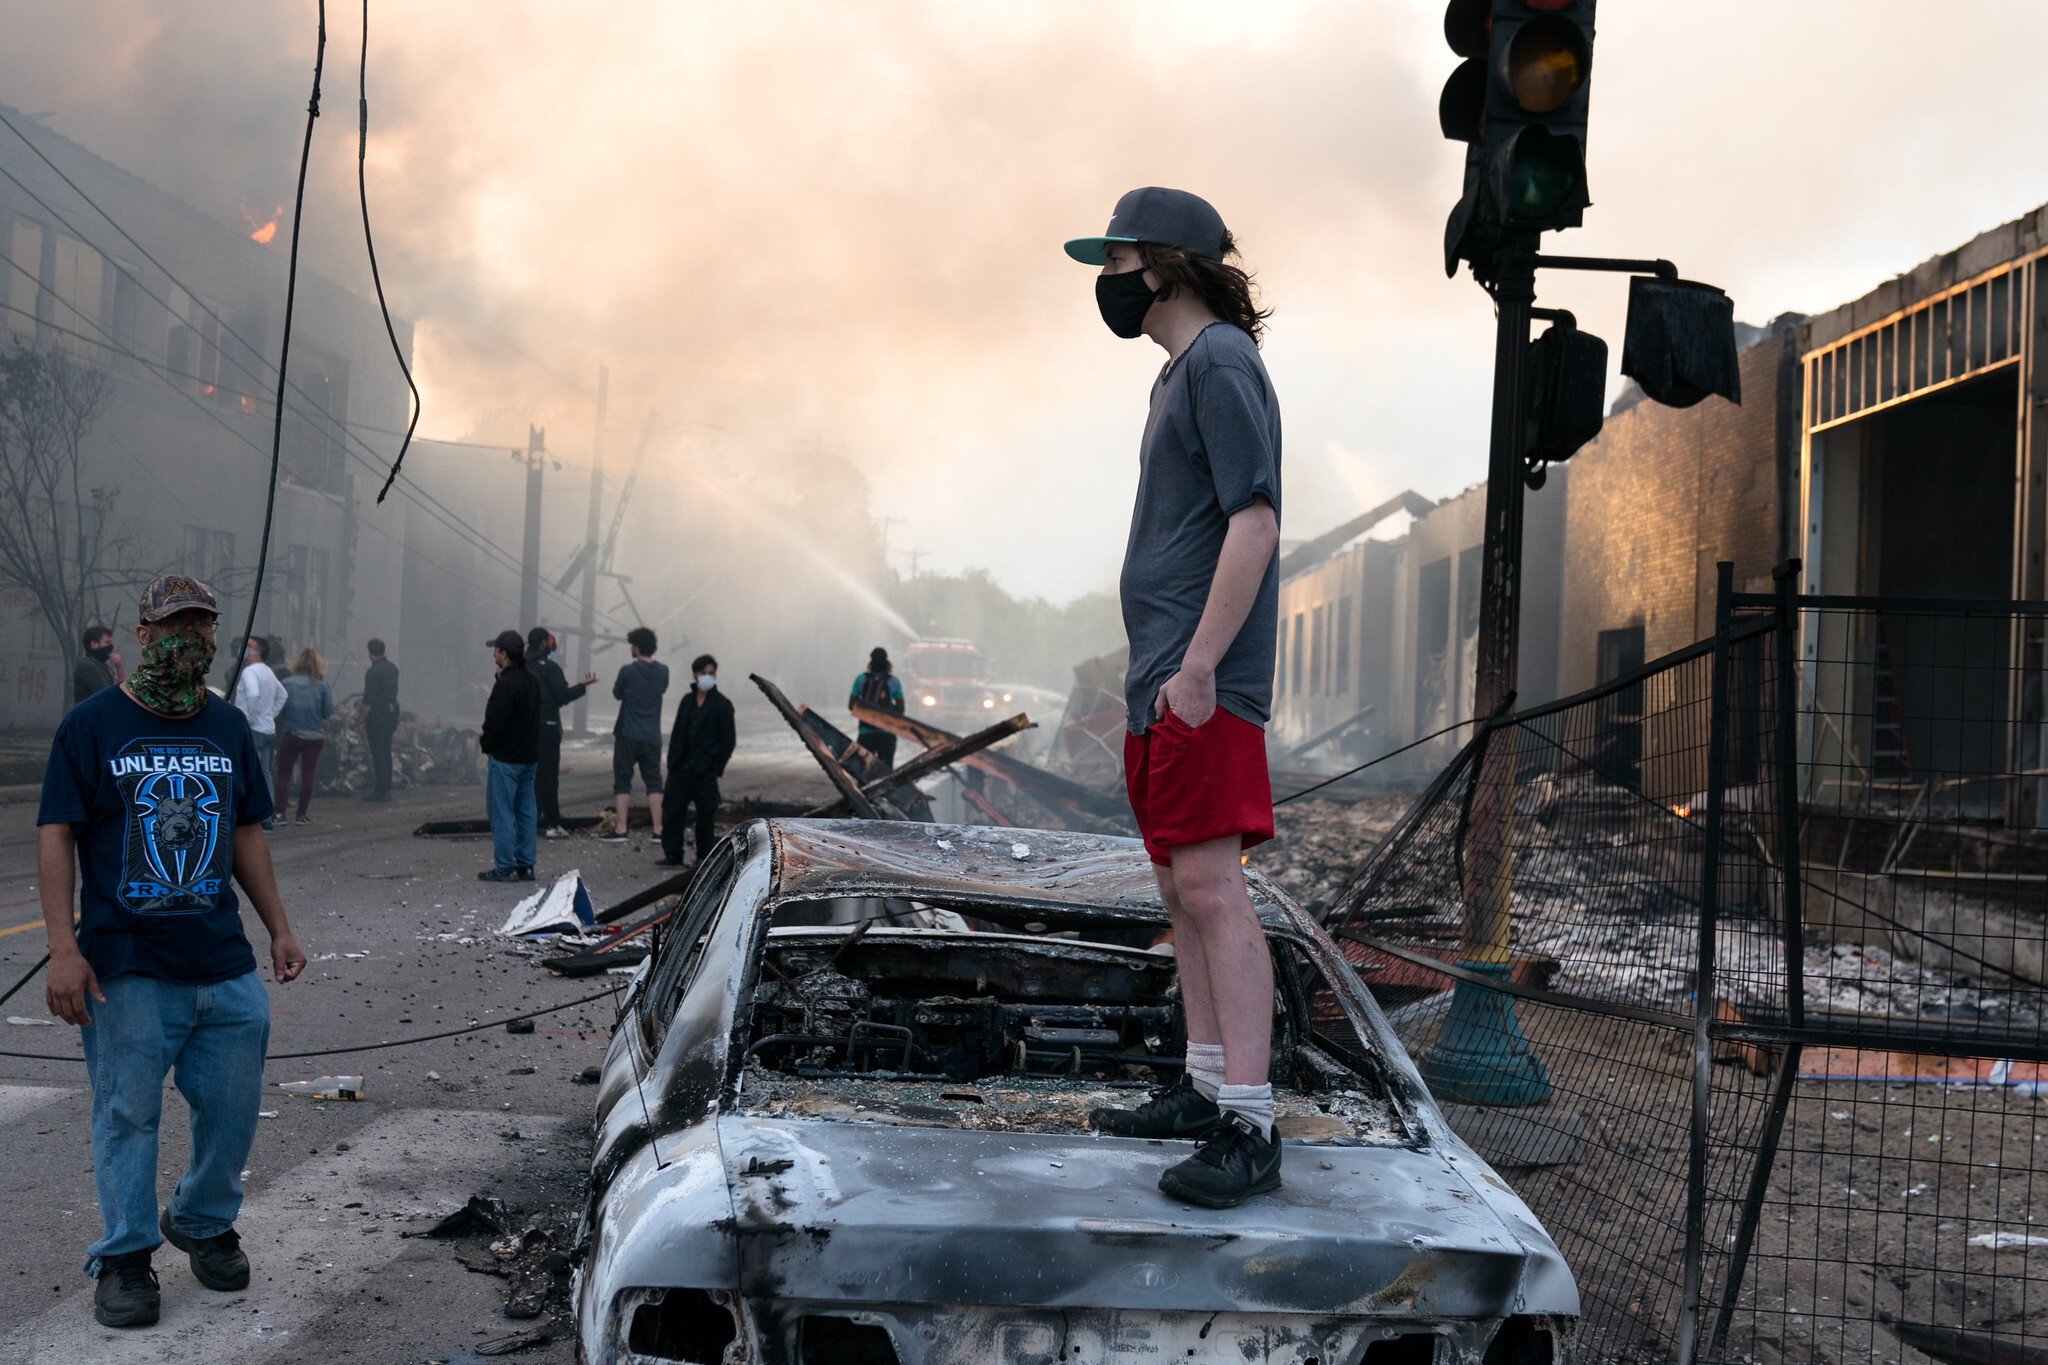  A man stands on a burned car on Thursday morning as fires burn behind him in the Lake St area of Minneapolis, Minnesota 